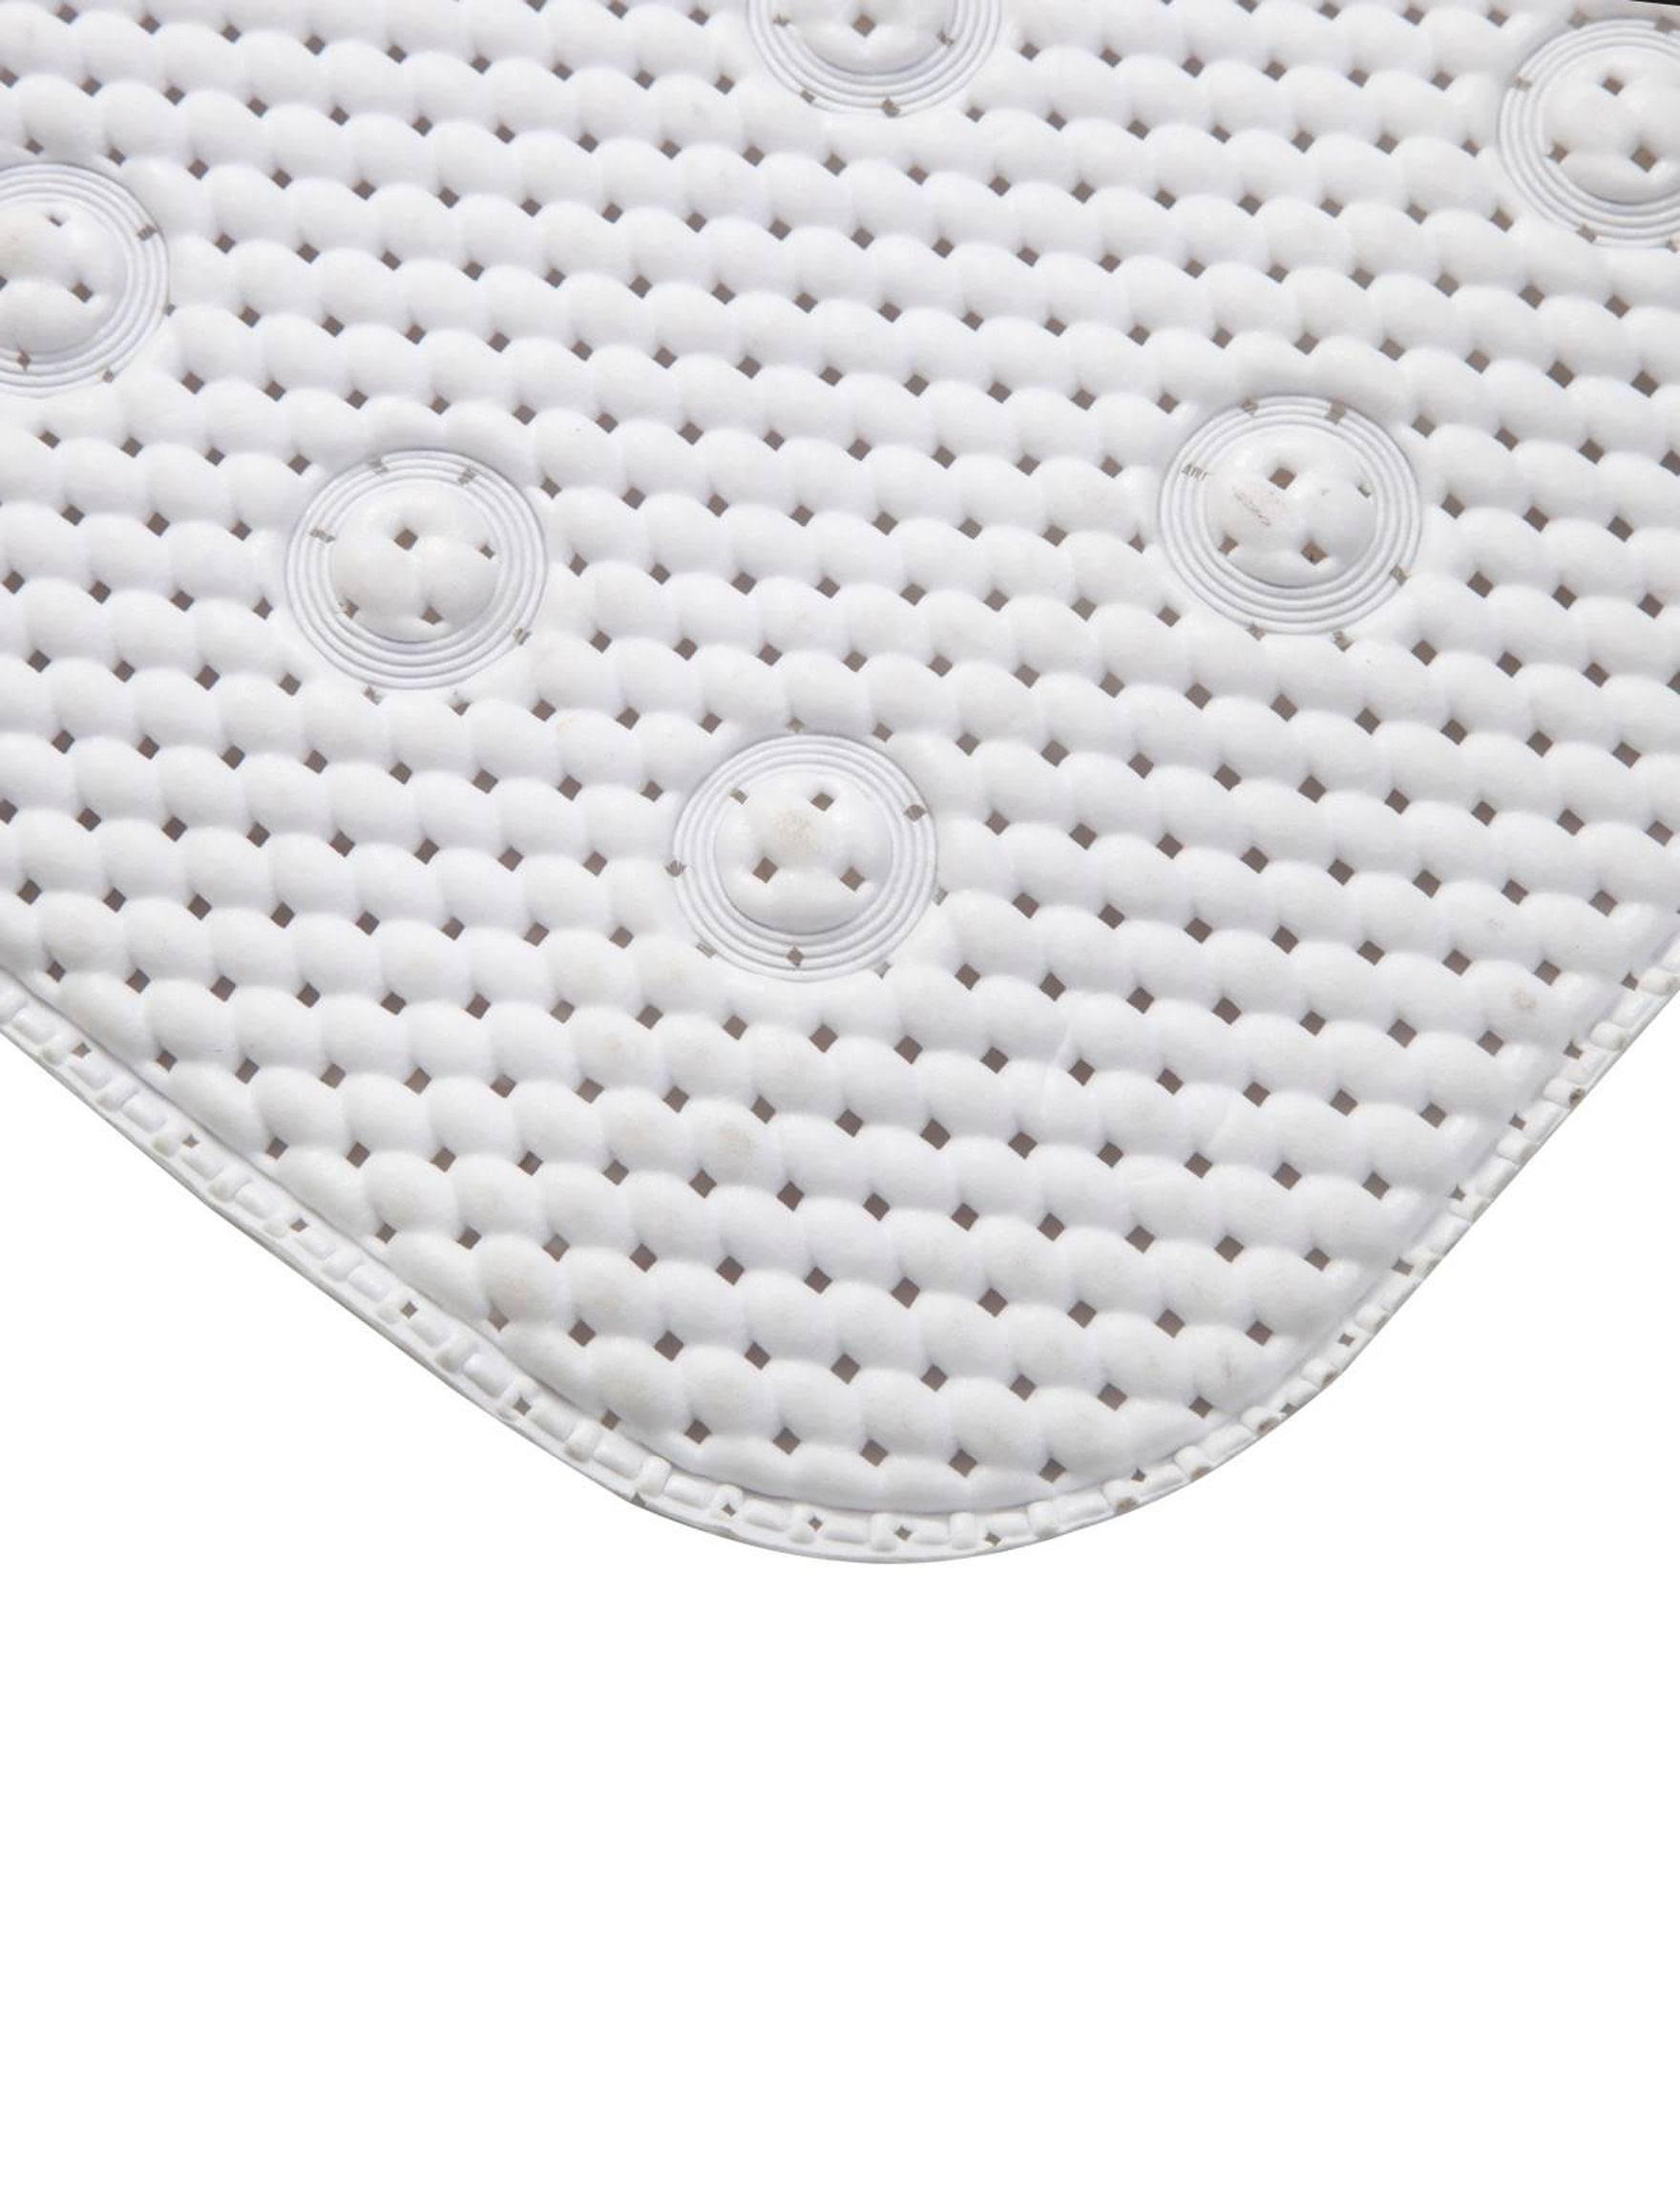 Kenney Foam Bath Mat, White | Bathroom | Best Price Guarantee | Delivery guaranteed | Free Shipping On All Orders